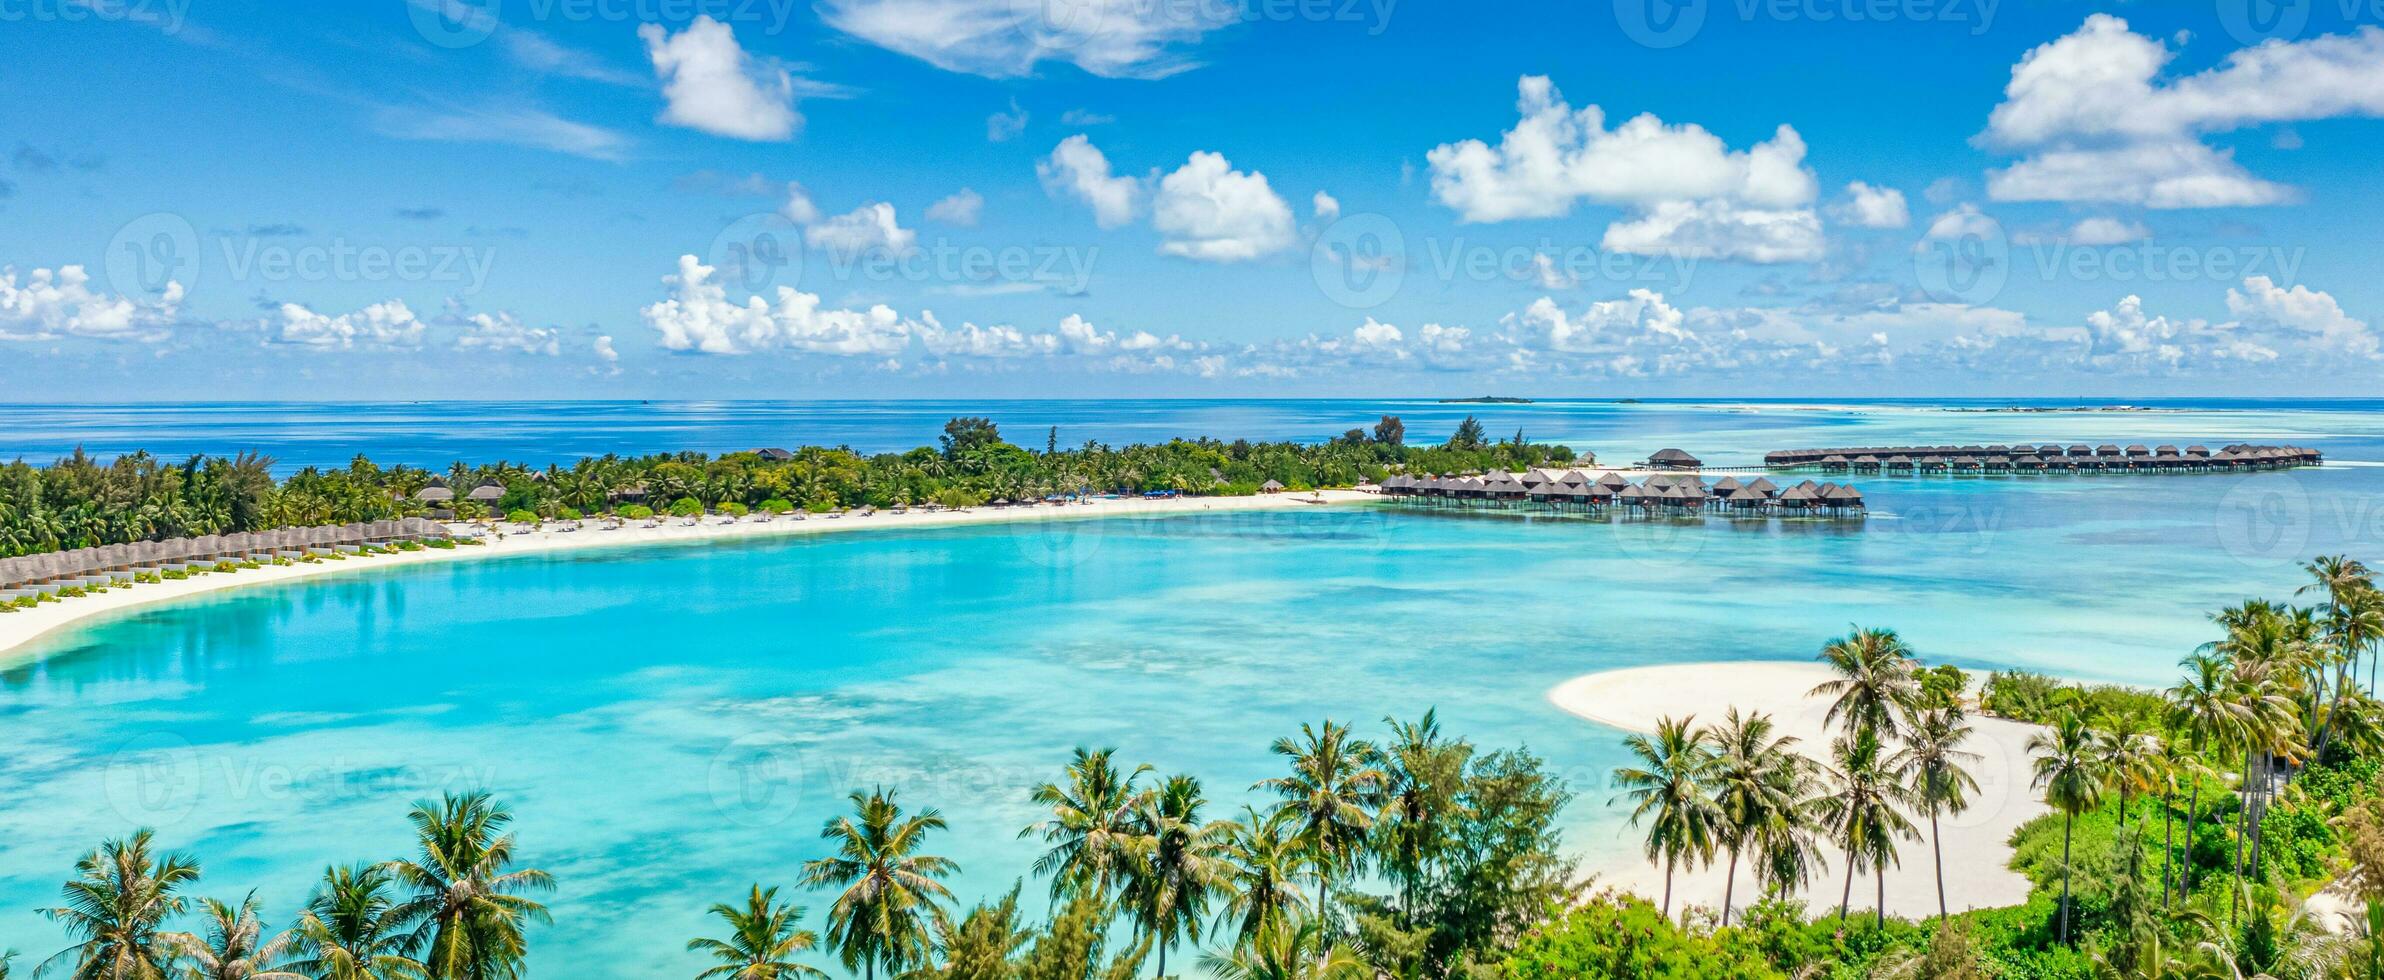 Amazing island beach. Maldives from aerial view tranquil tropical landscape seaside with palm trees on white sandy beach. Exotic nature shore, luxury resort island. Beautiful summer holiday tourism photo